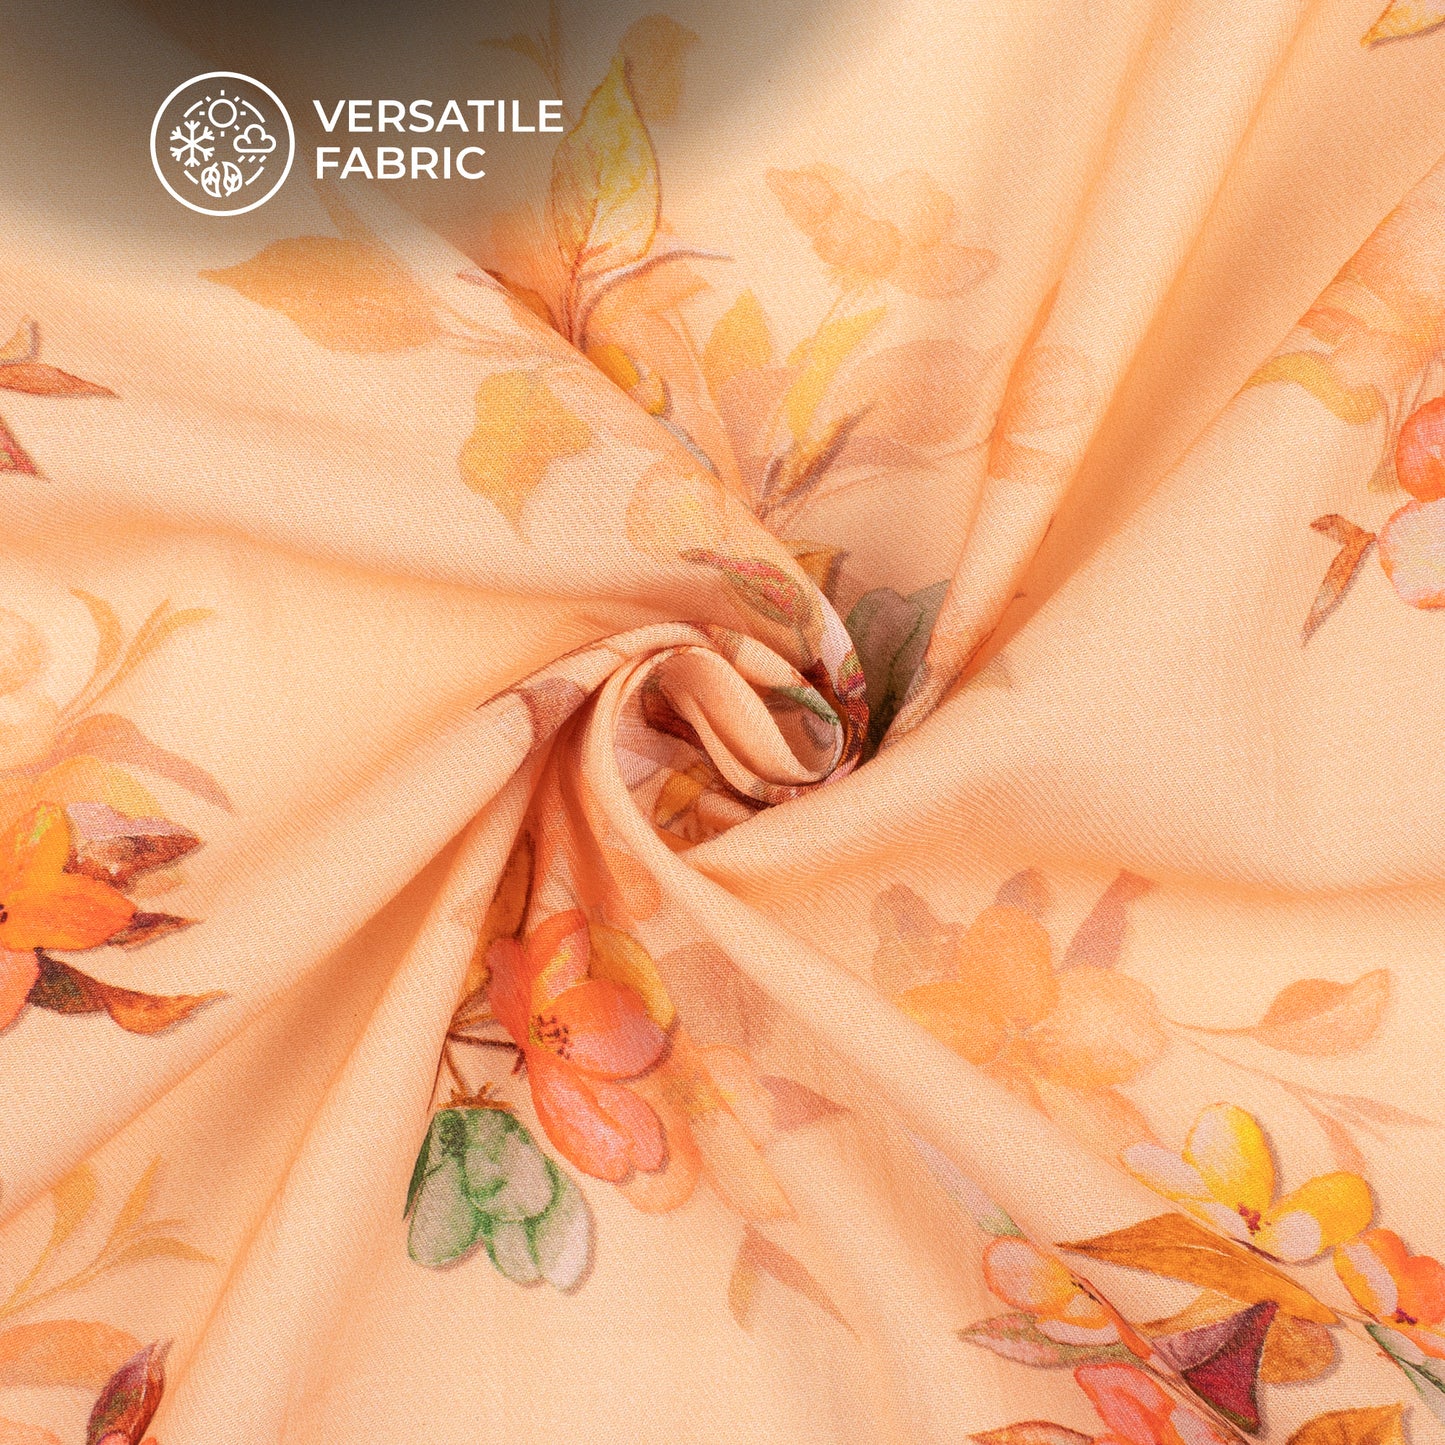 Peach Floral Printed Sustainable Milk Fabric